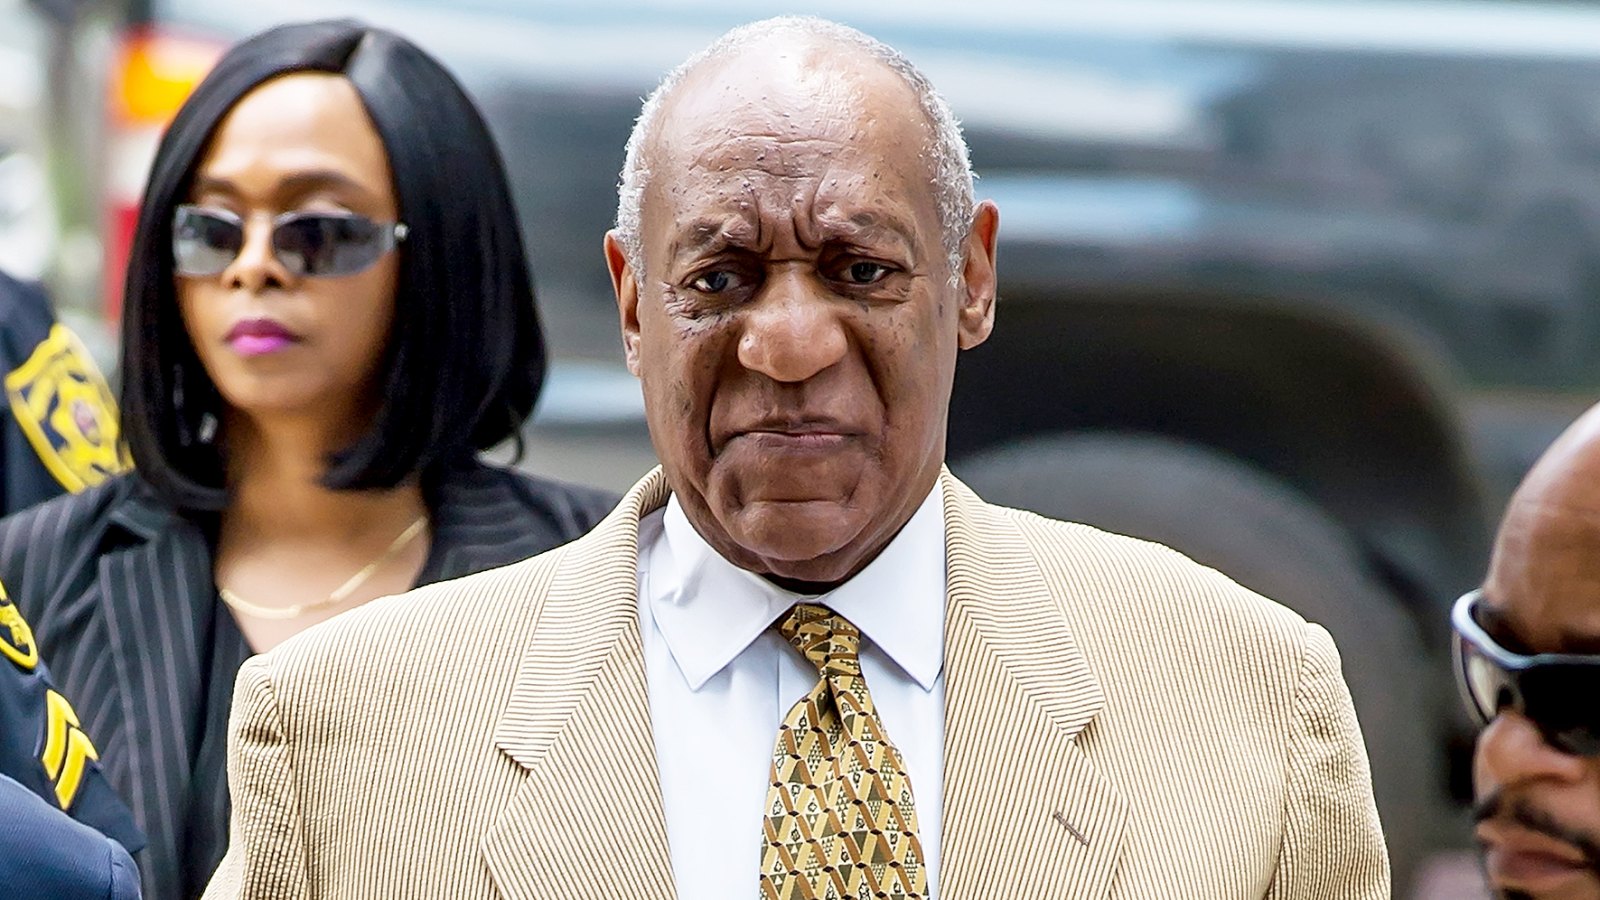 Bill Cosby arrives at Montgomery County Courthouse on July 7, 2016 in Norristown, Pennsylvania.